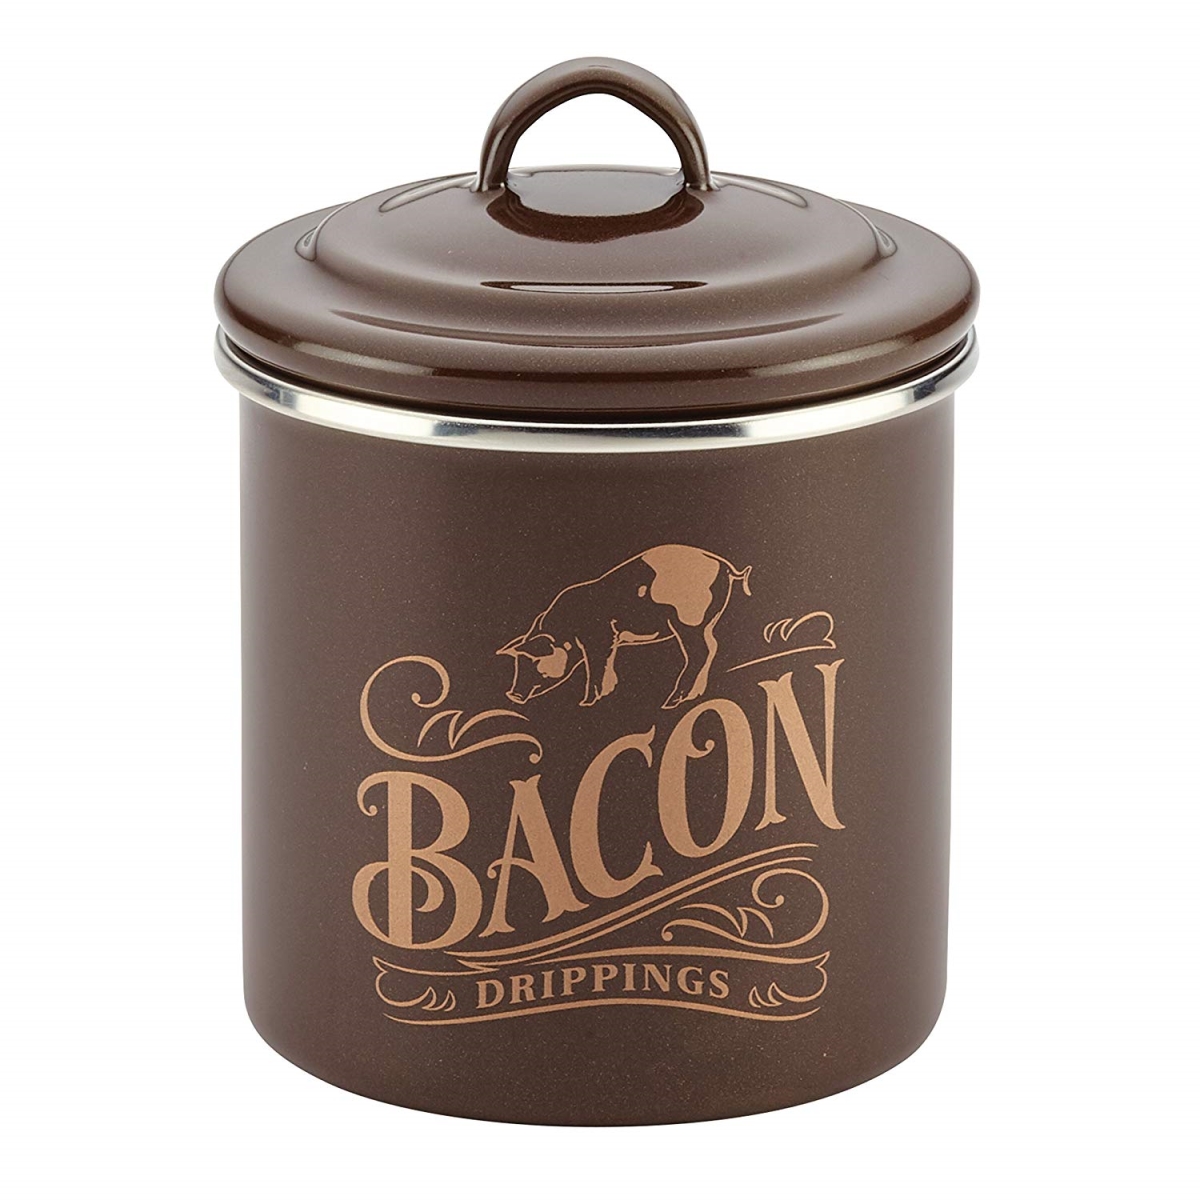 09080 Ayesha Collection Enamel On Steel Bacon Grease Cans, Brown Sugar & Basil Green - Set Of 2